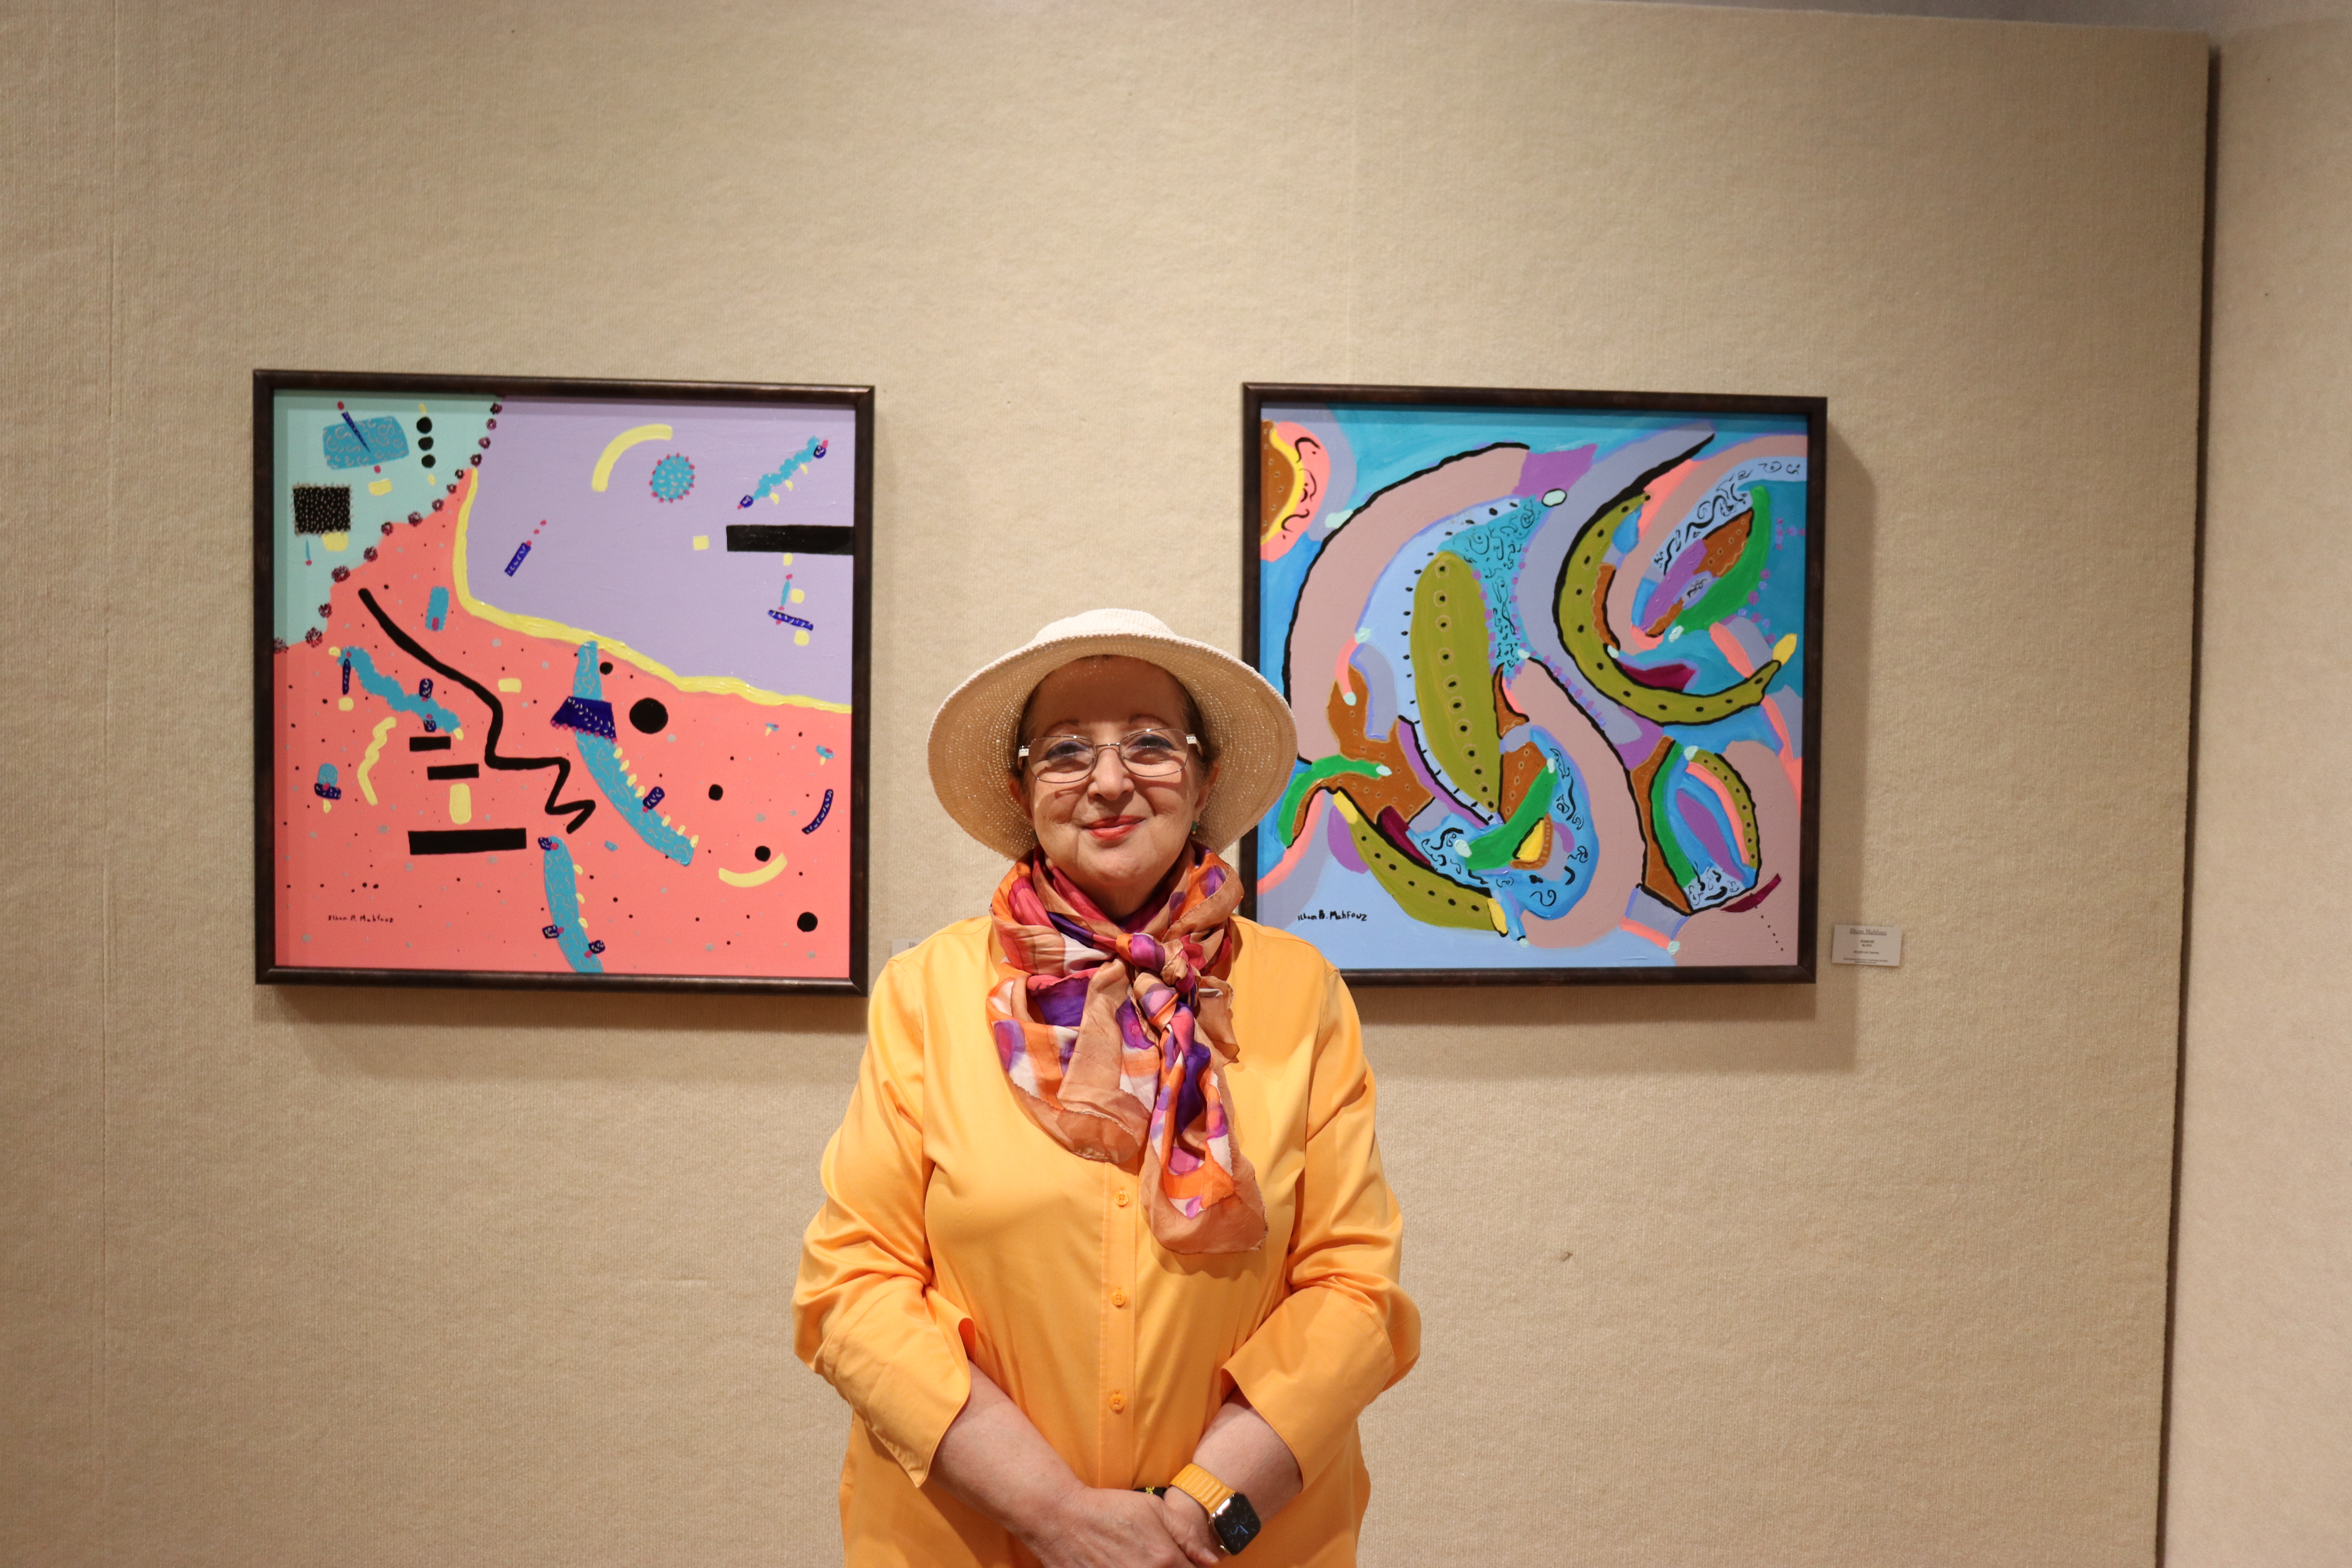 Ilham Mahfouz in front of her artwork on display as part of “For the Love of Humanity” exhibit, Padzieski Gallery in Dearborn, MI. Photo by Zynab Al-Timimi